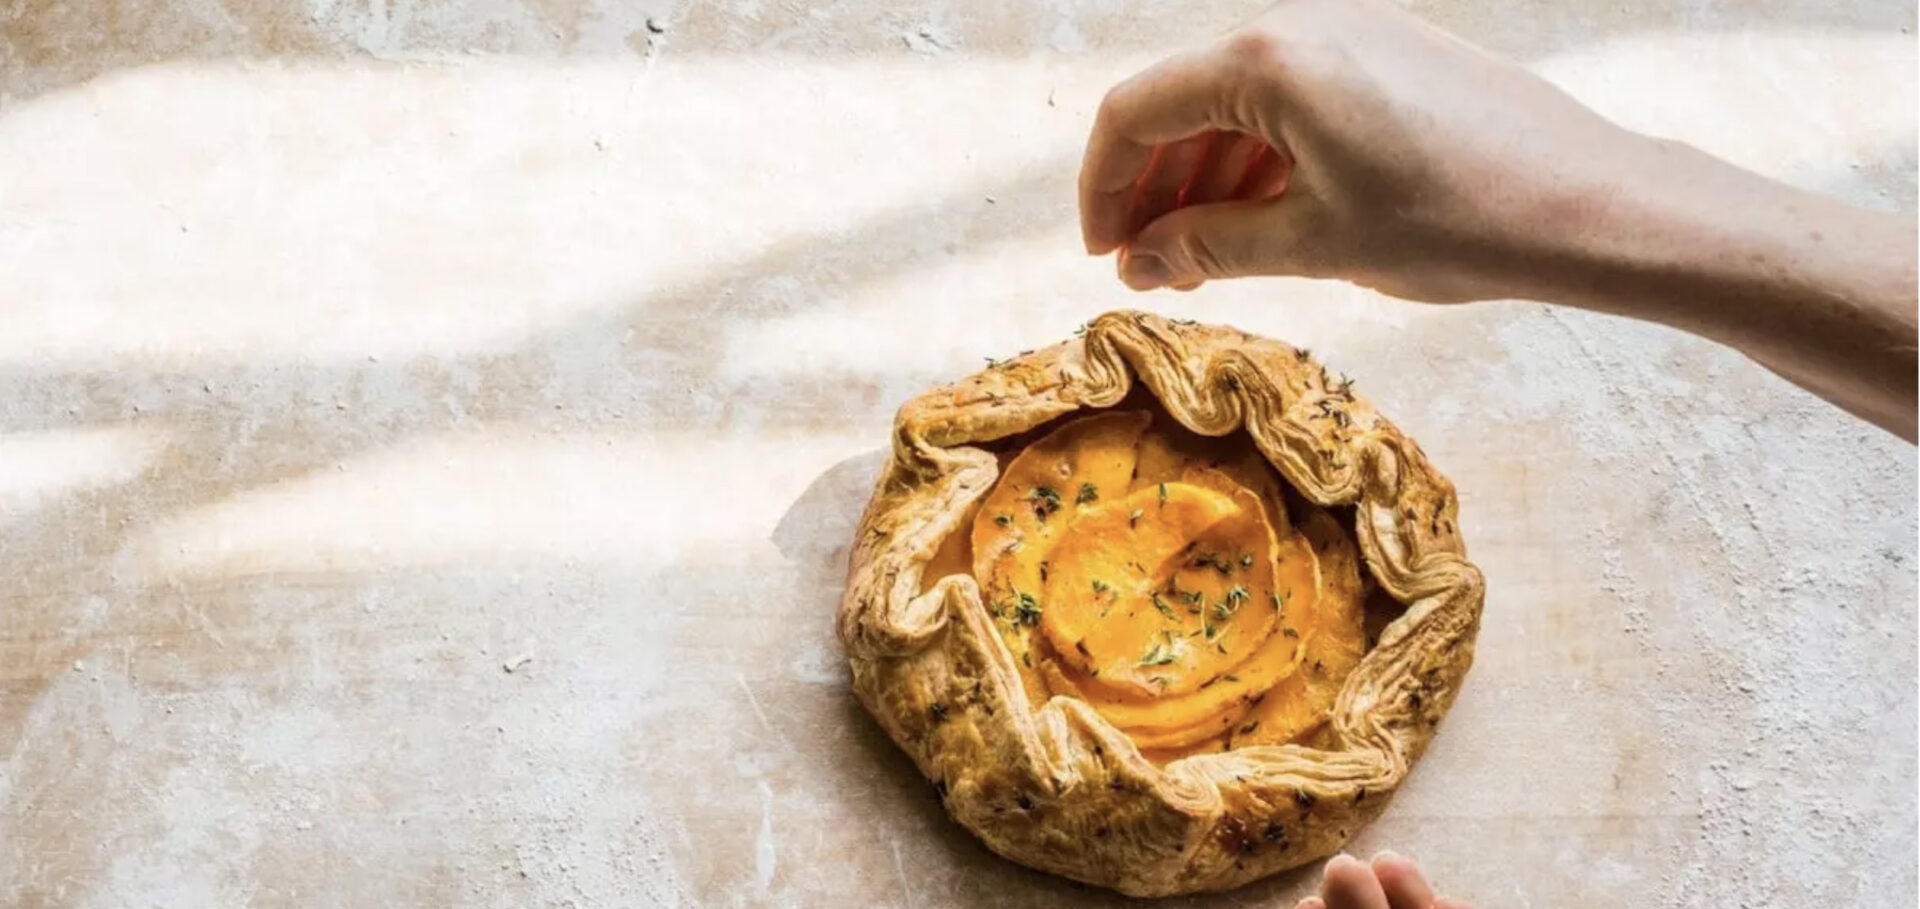 Butternut squash and goat cheese galette an option for Sunday baking 